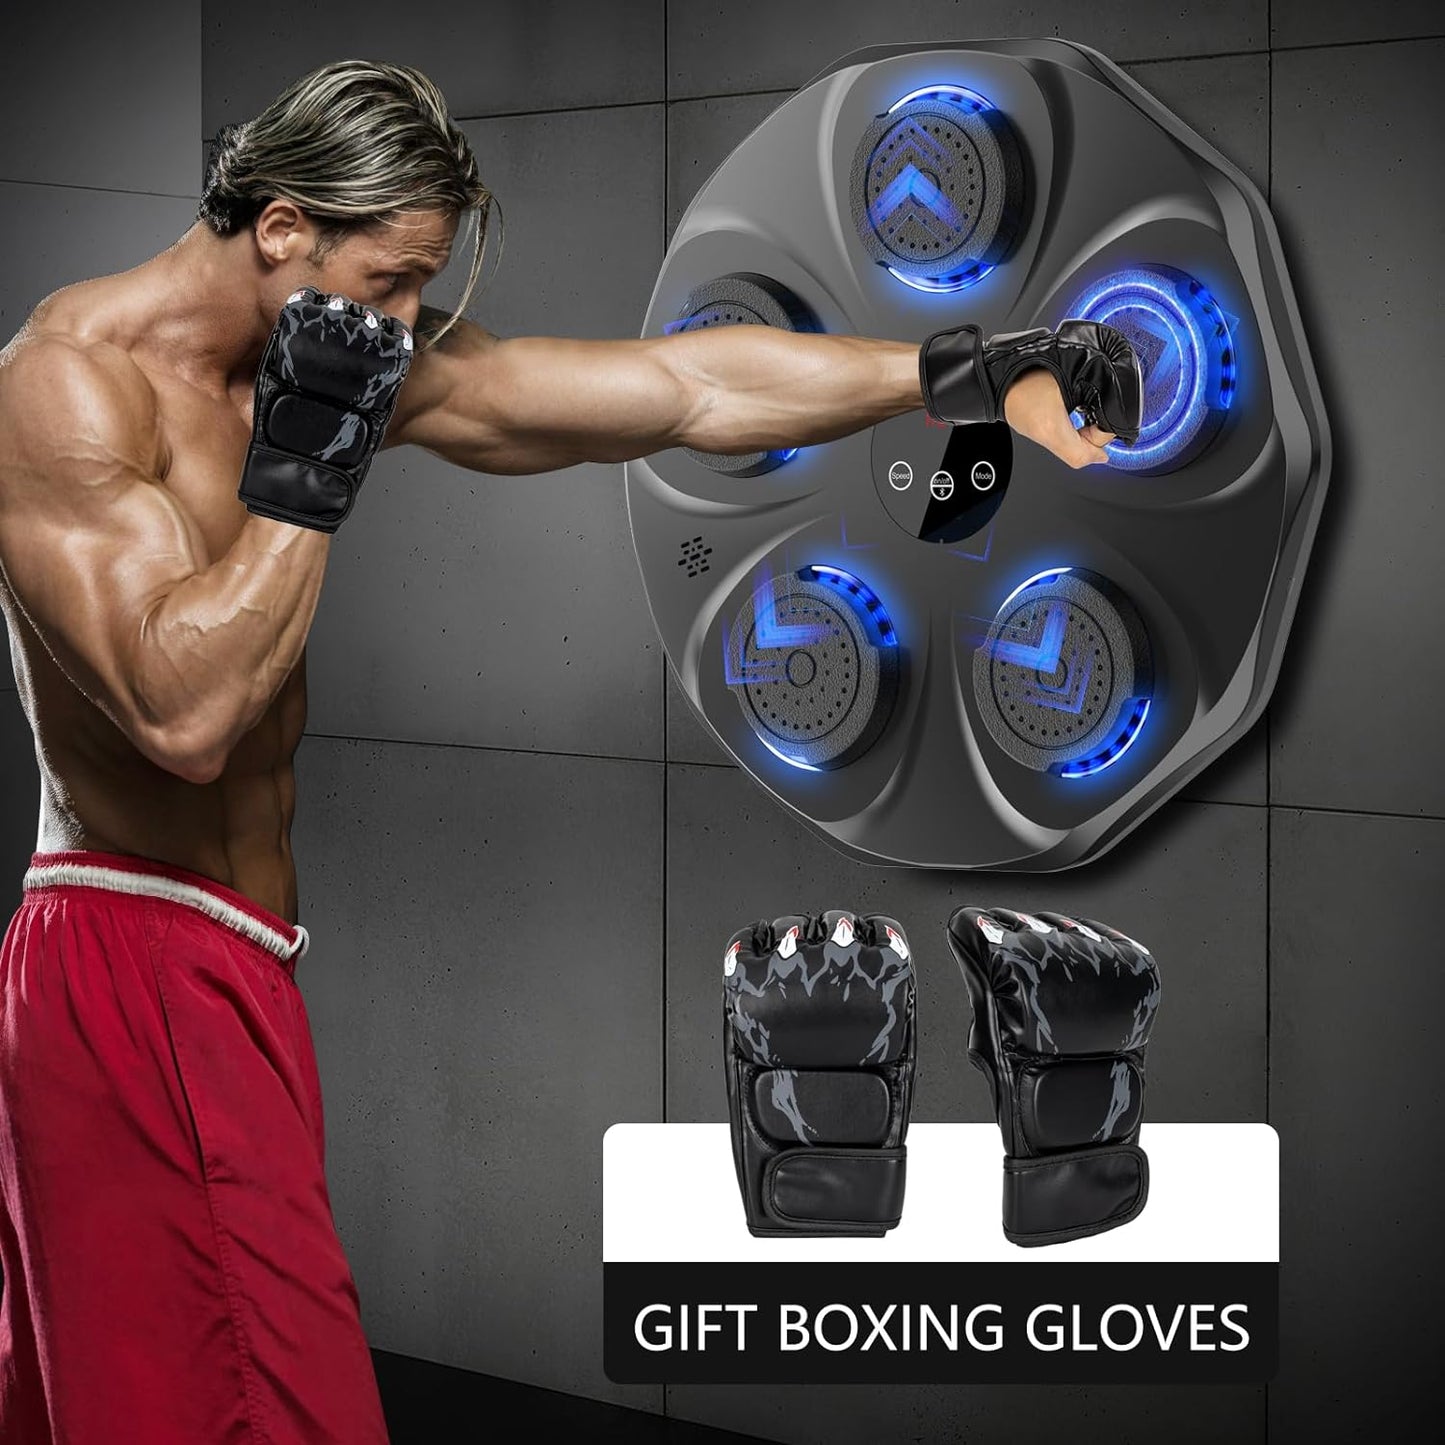 TGLLM Music Boxing Machine with Boxing Gloves, Wall Mounted Smart Bluetooth Music Boxing Trainer, Electronic Boxing Target Training Punching Equipment for Home,Indoor and Gym